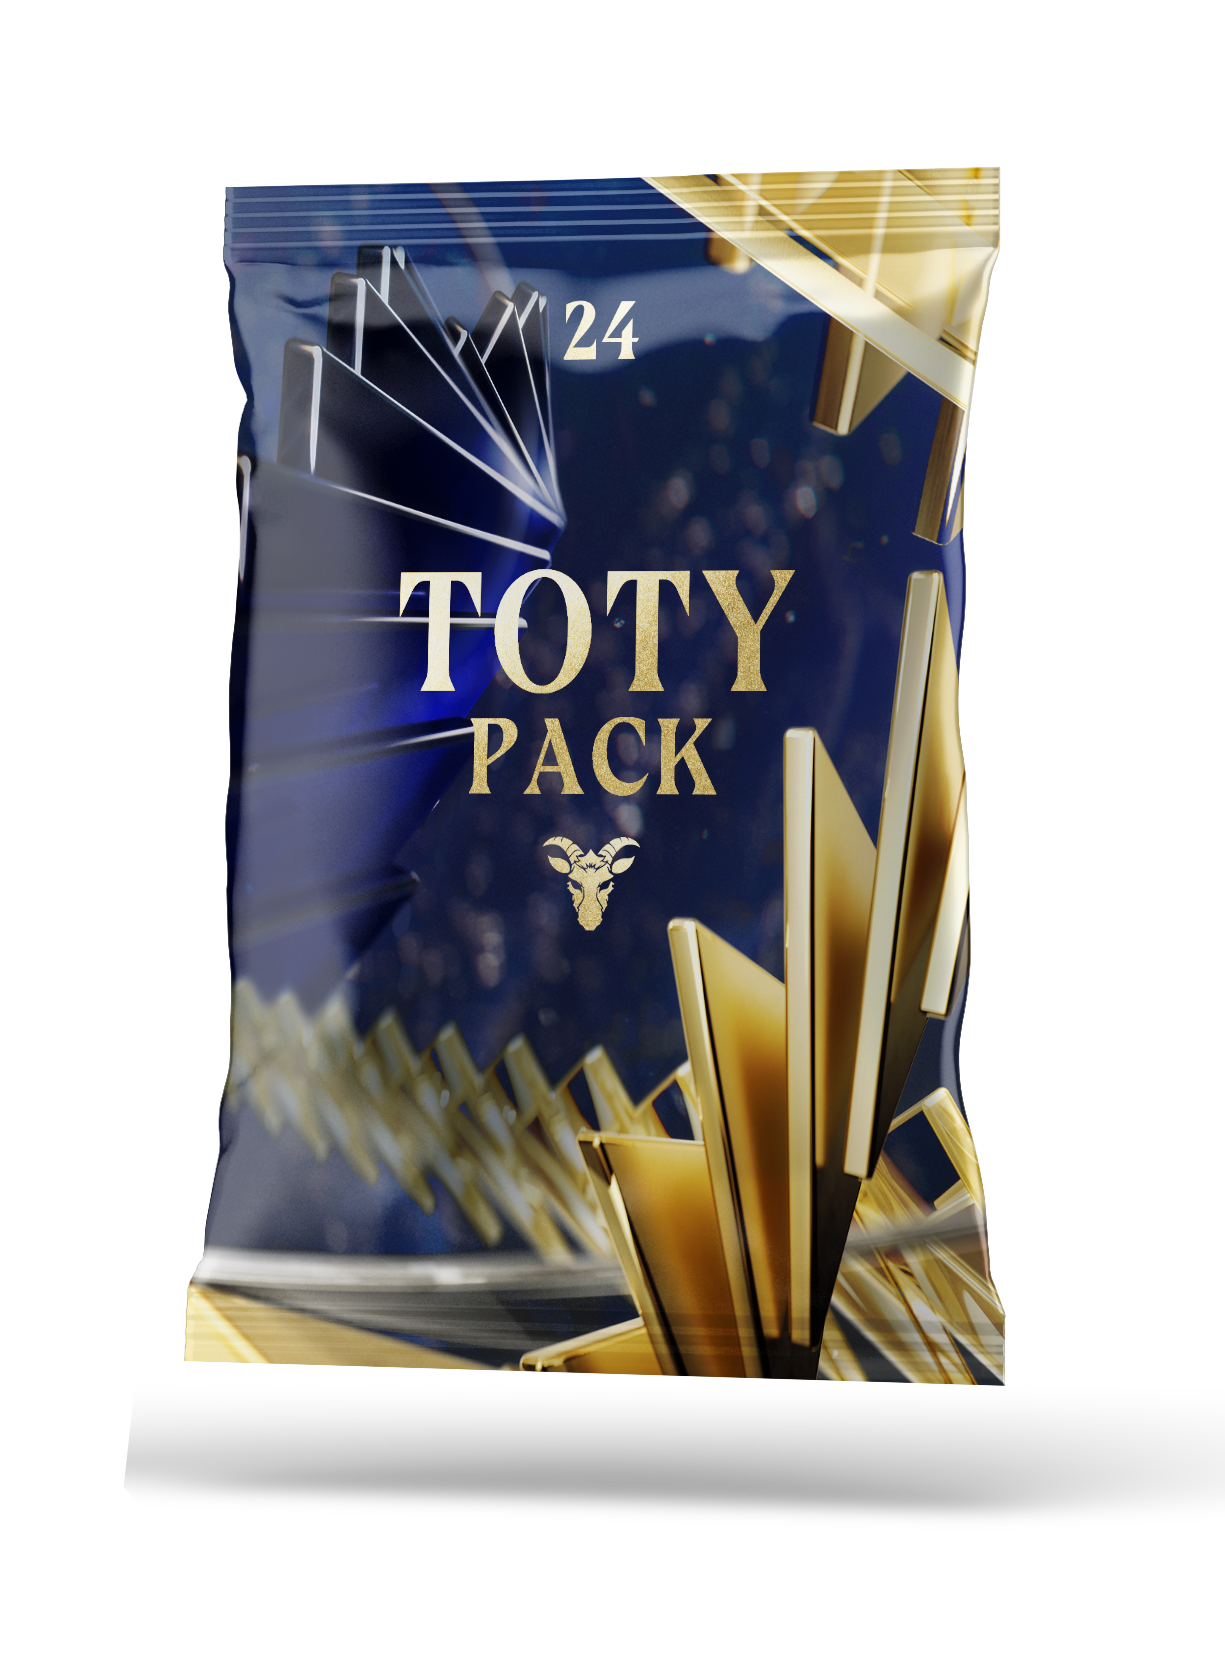 S24 Pack - TOTY